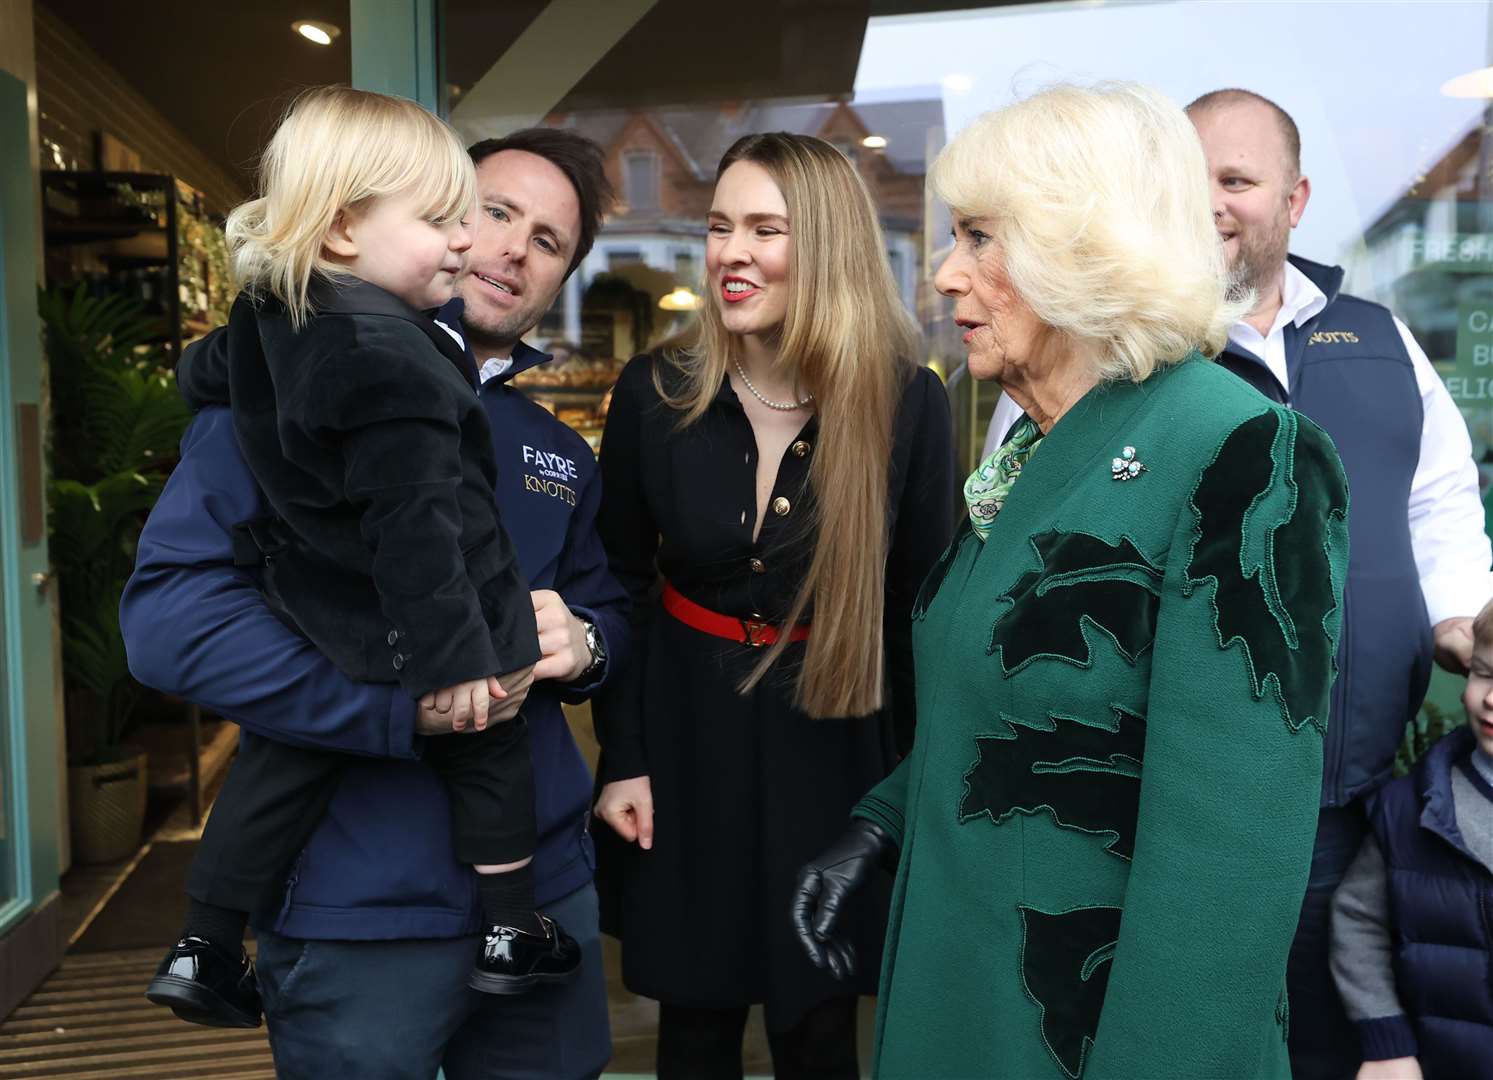 Camilla meets the owner of Knotts Bakery, William Corrie, his wife Zoe Salmon and their son Fitz during the visit to Belfast (Liam McBurney/PA)